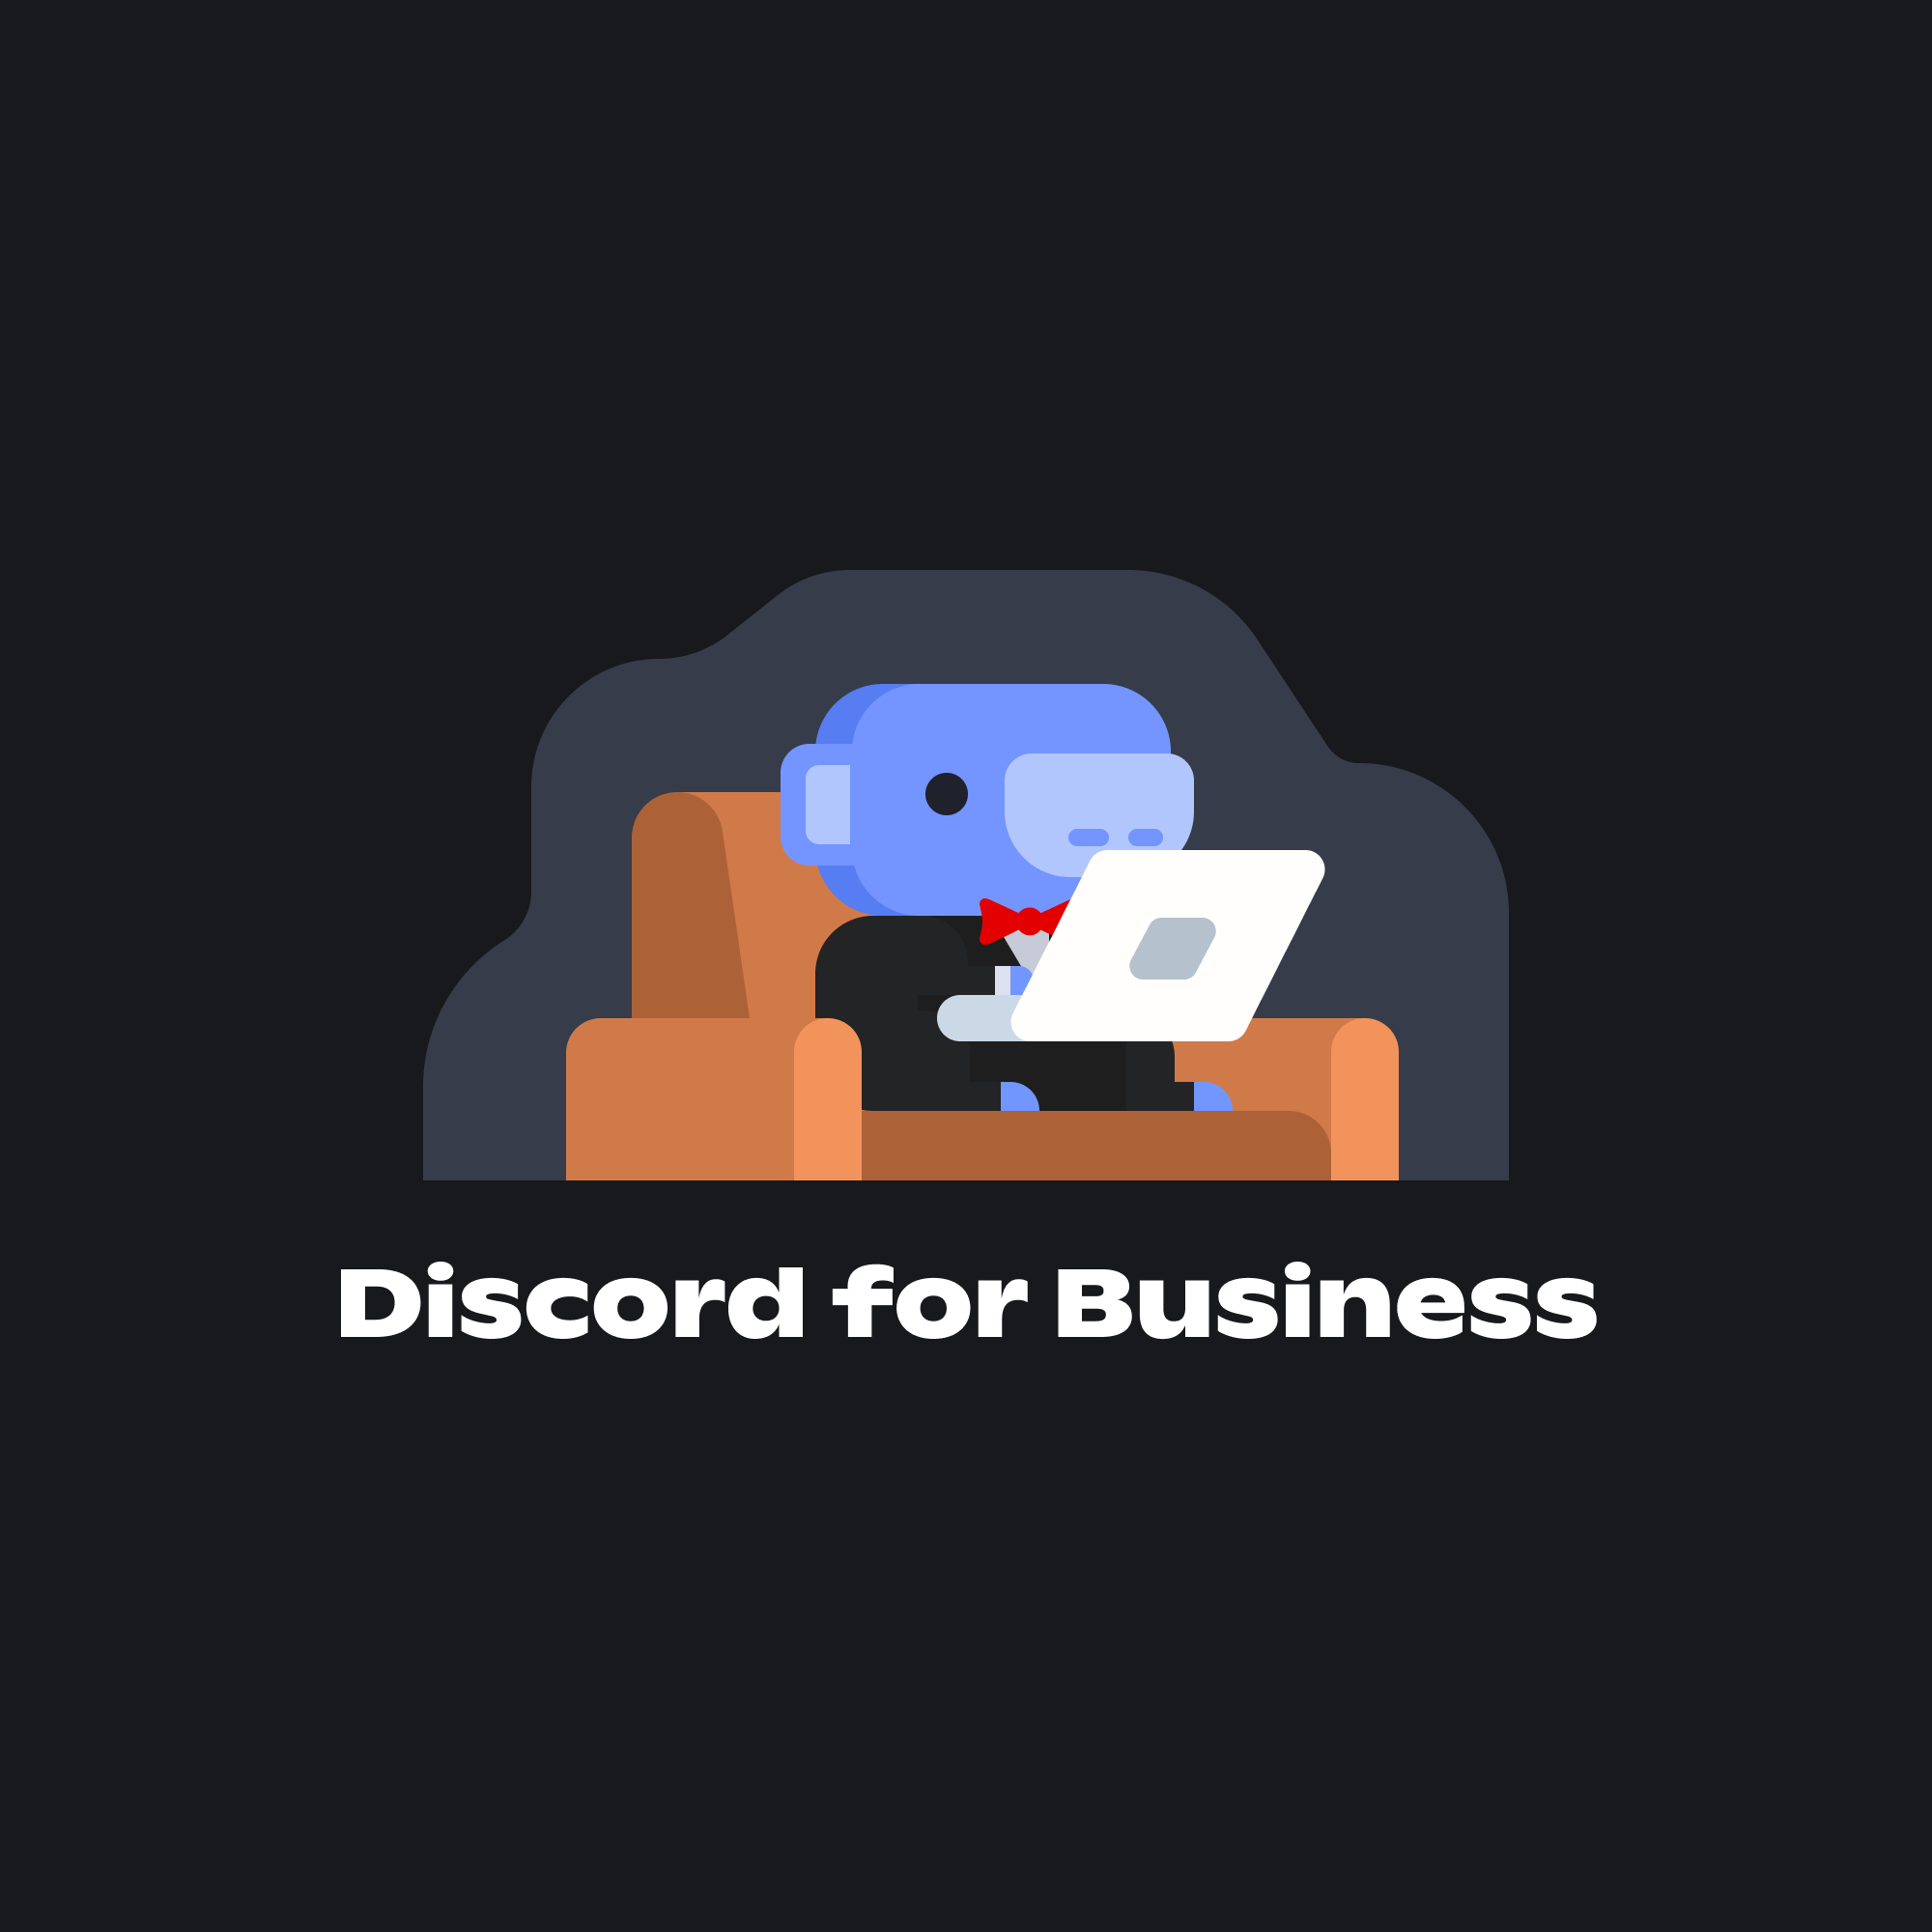 Discord for Business Concept